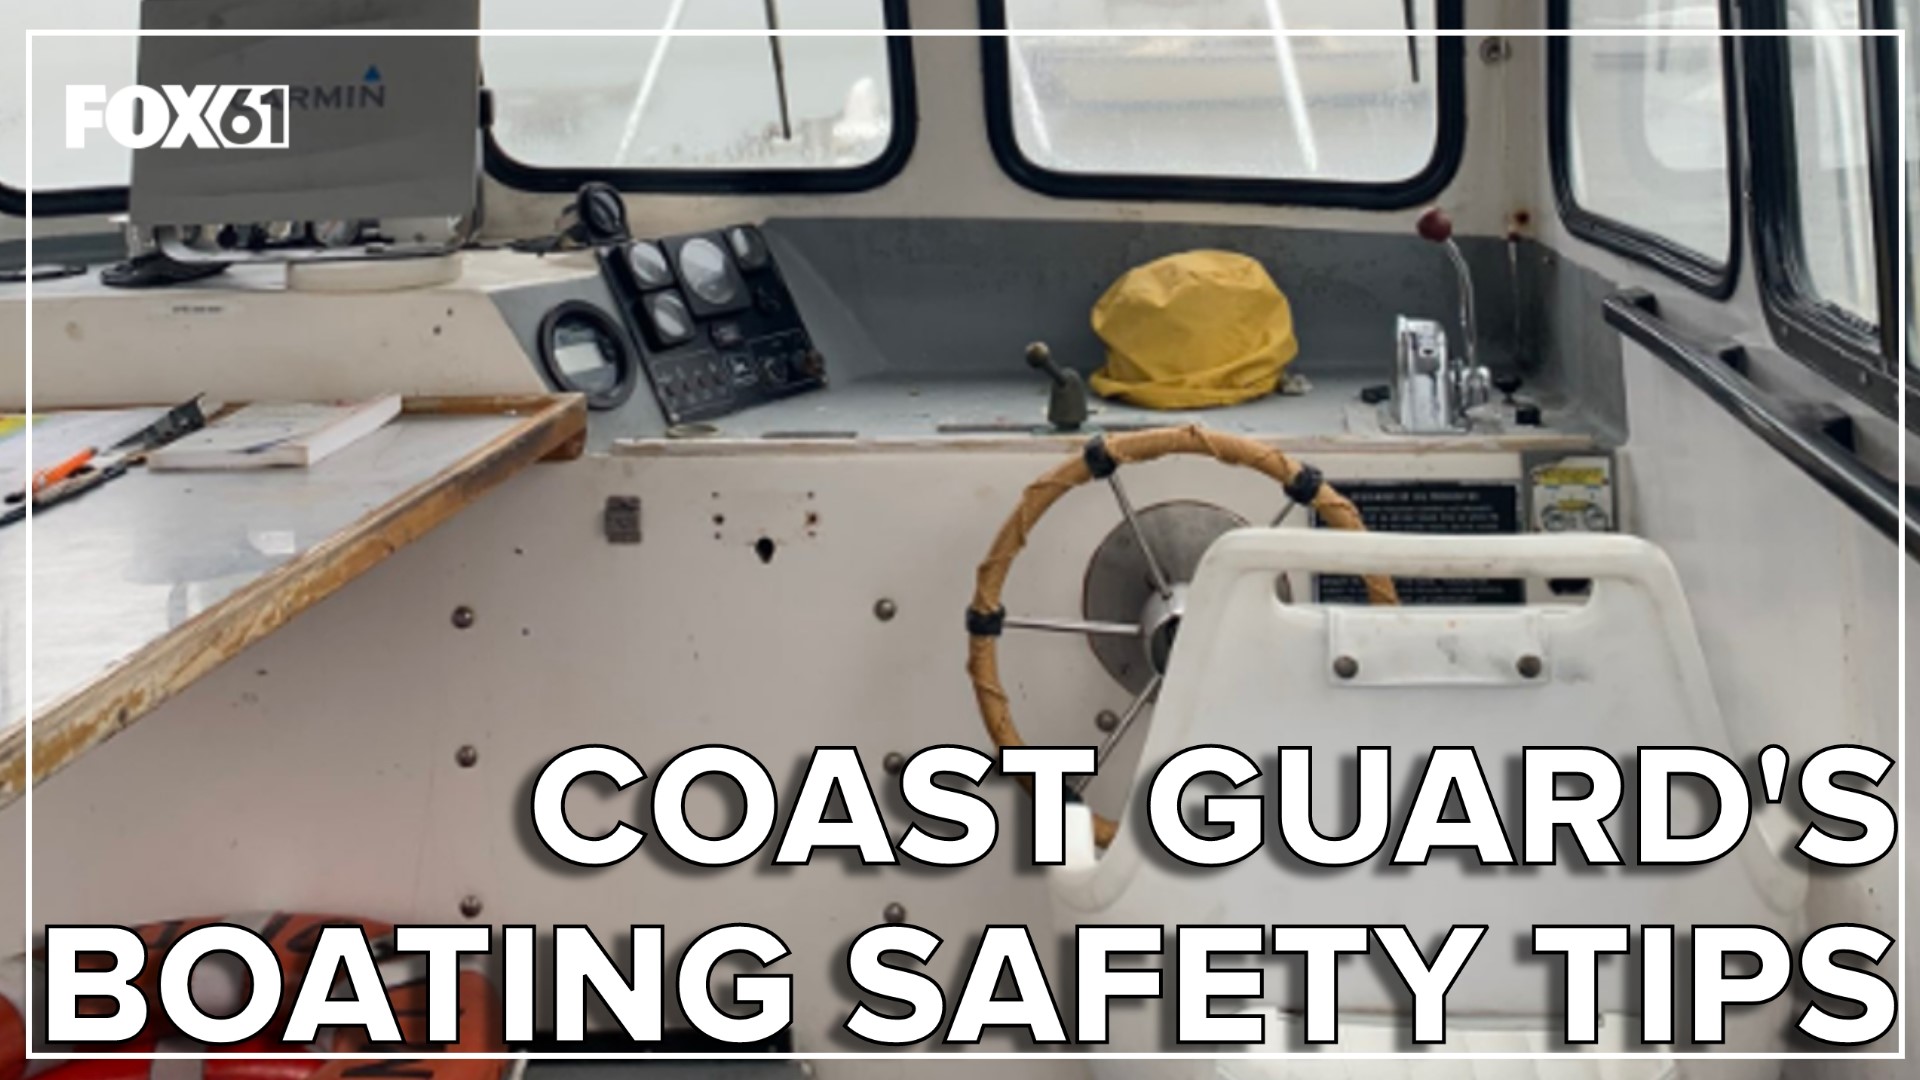 Members of the Coast Guard Auxiliary in Milford reminded boaters Friday to remember basic life-saving tips when out on the water.